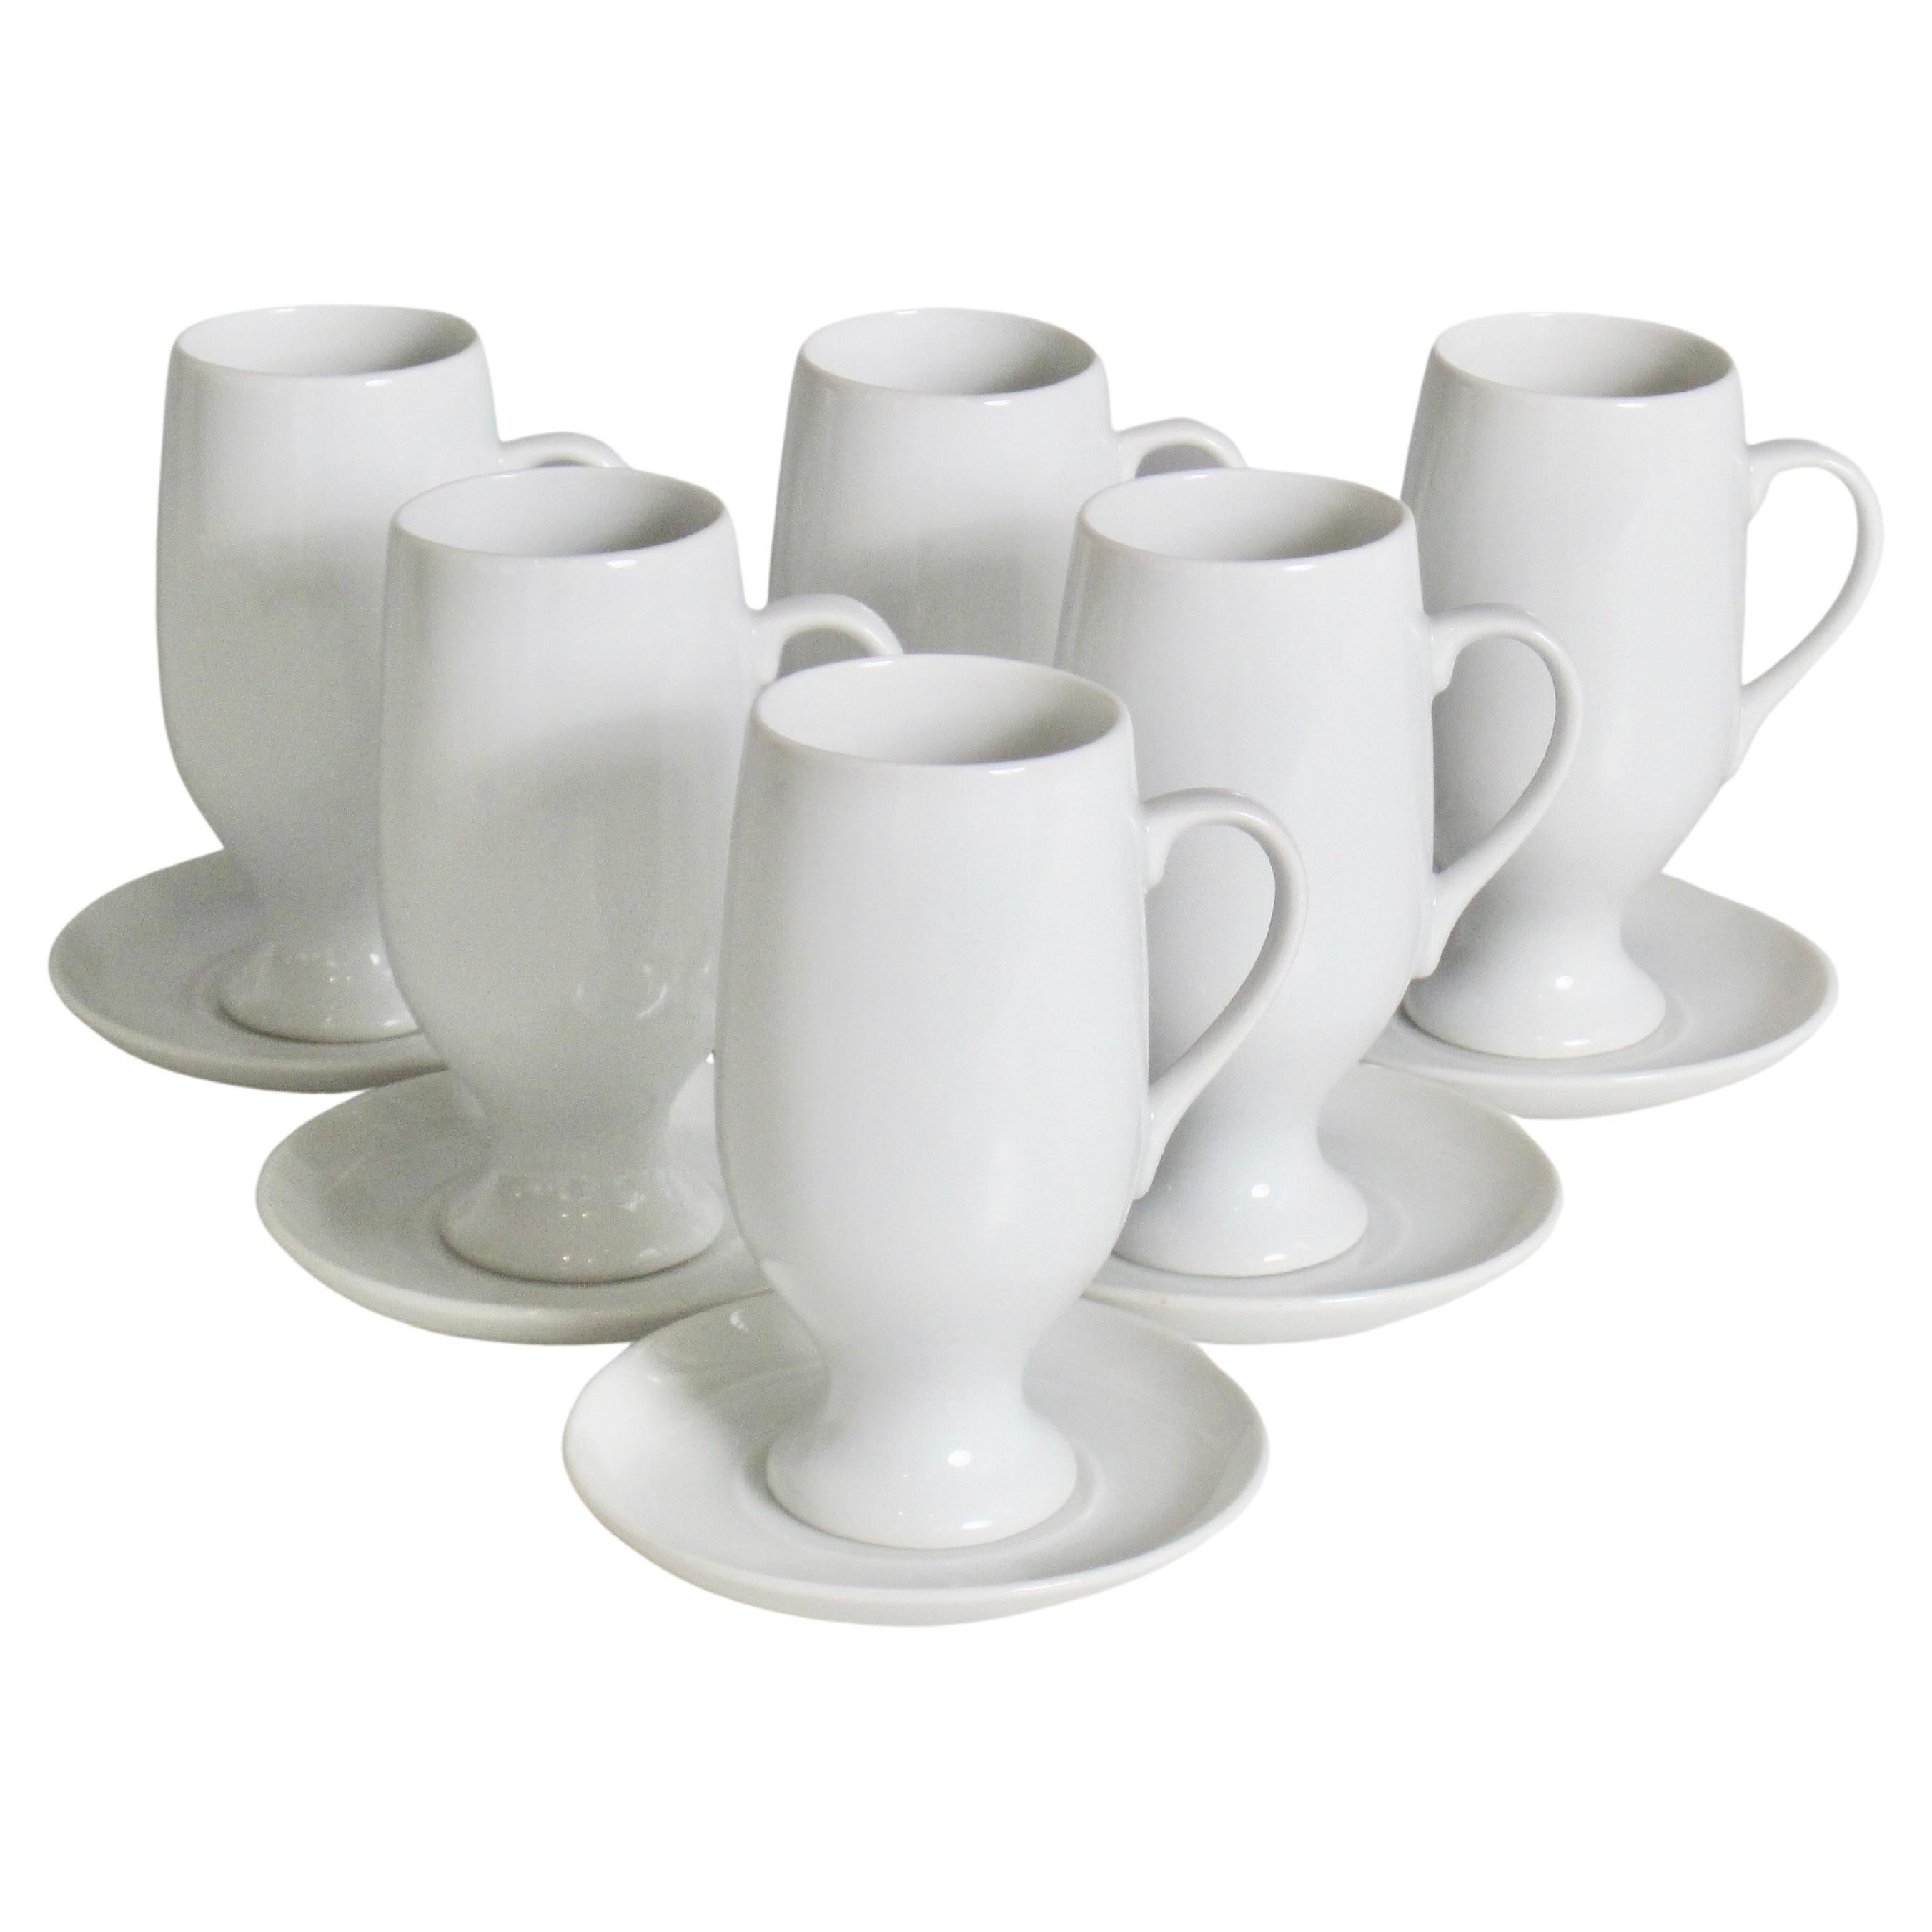 Set of Six Espresso Cups and Saucers Designed by Lagardo Tackett for Schmid For Sale